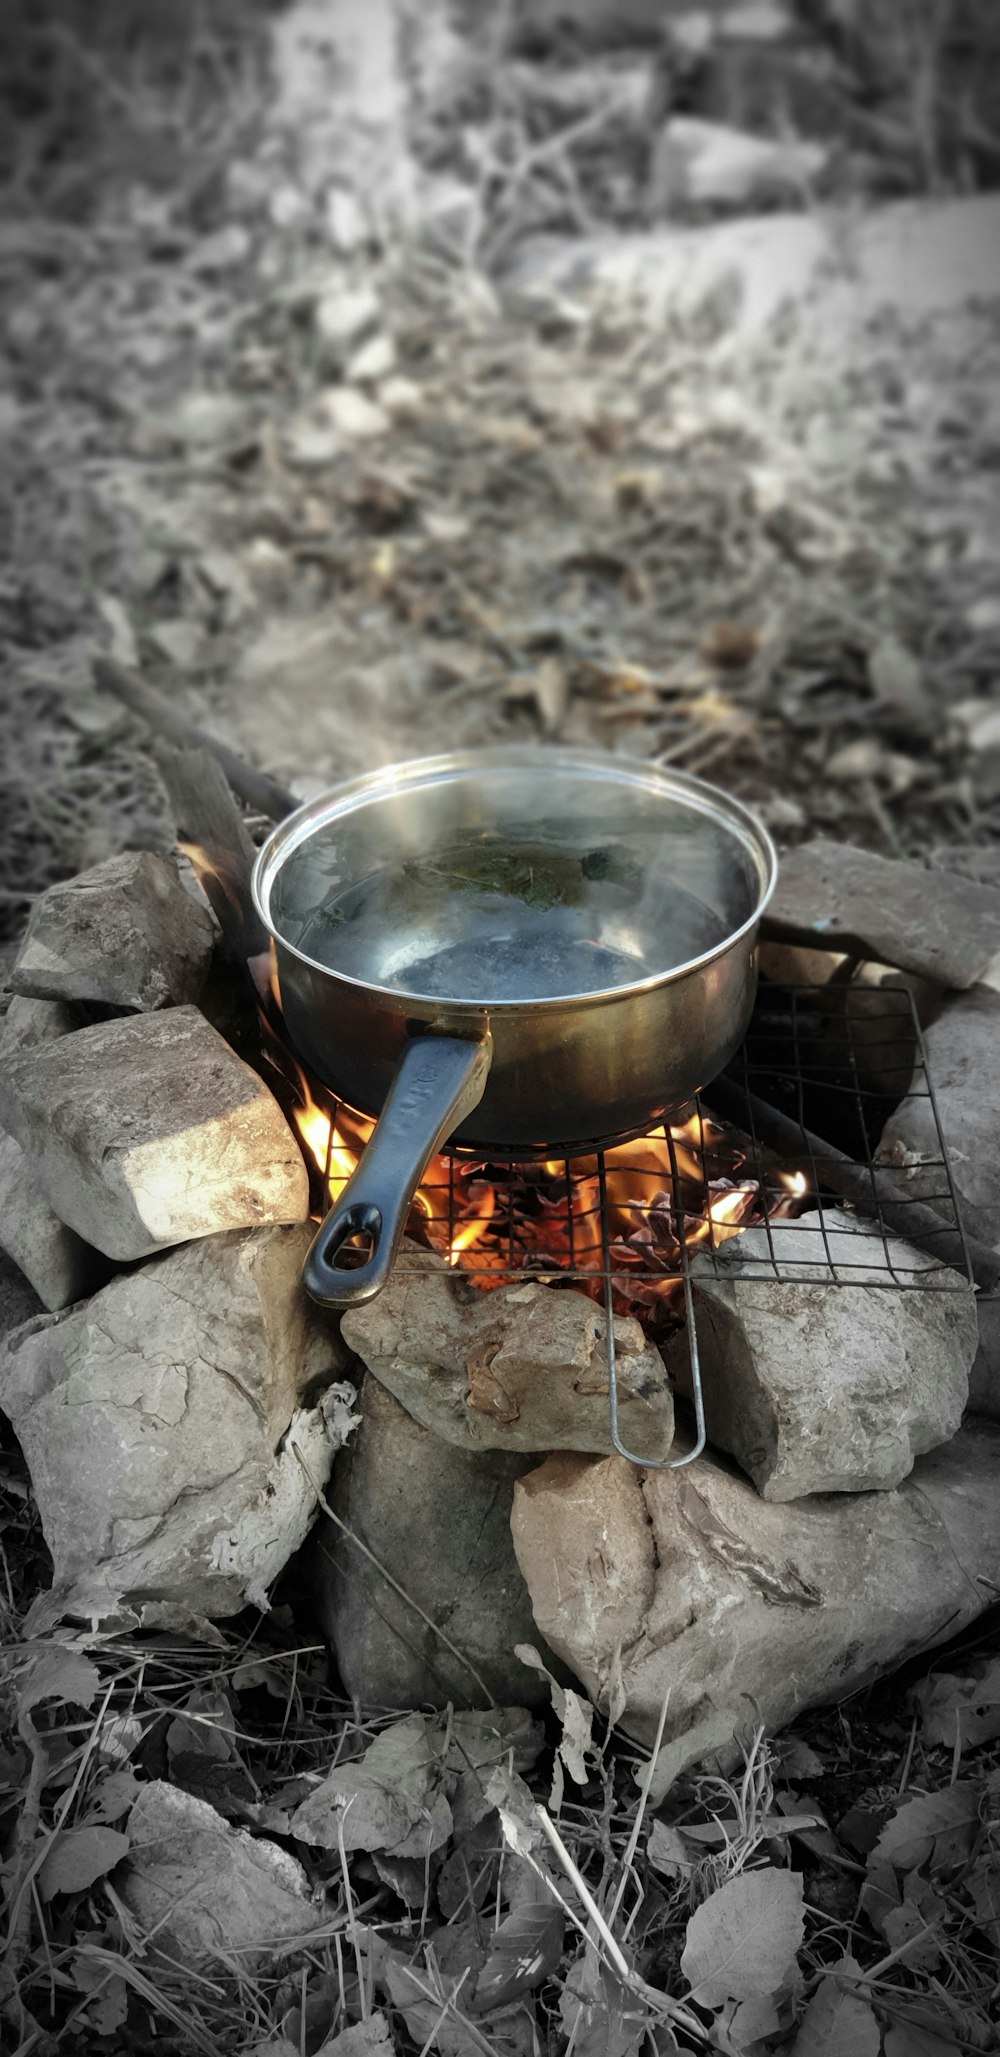 stainless steel cooking pot on fire